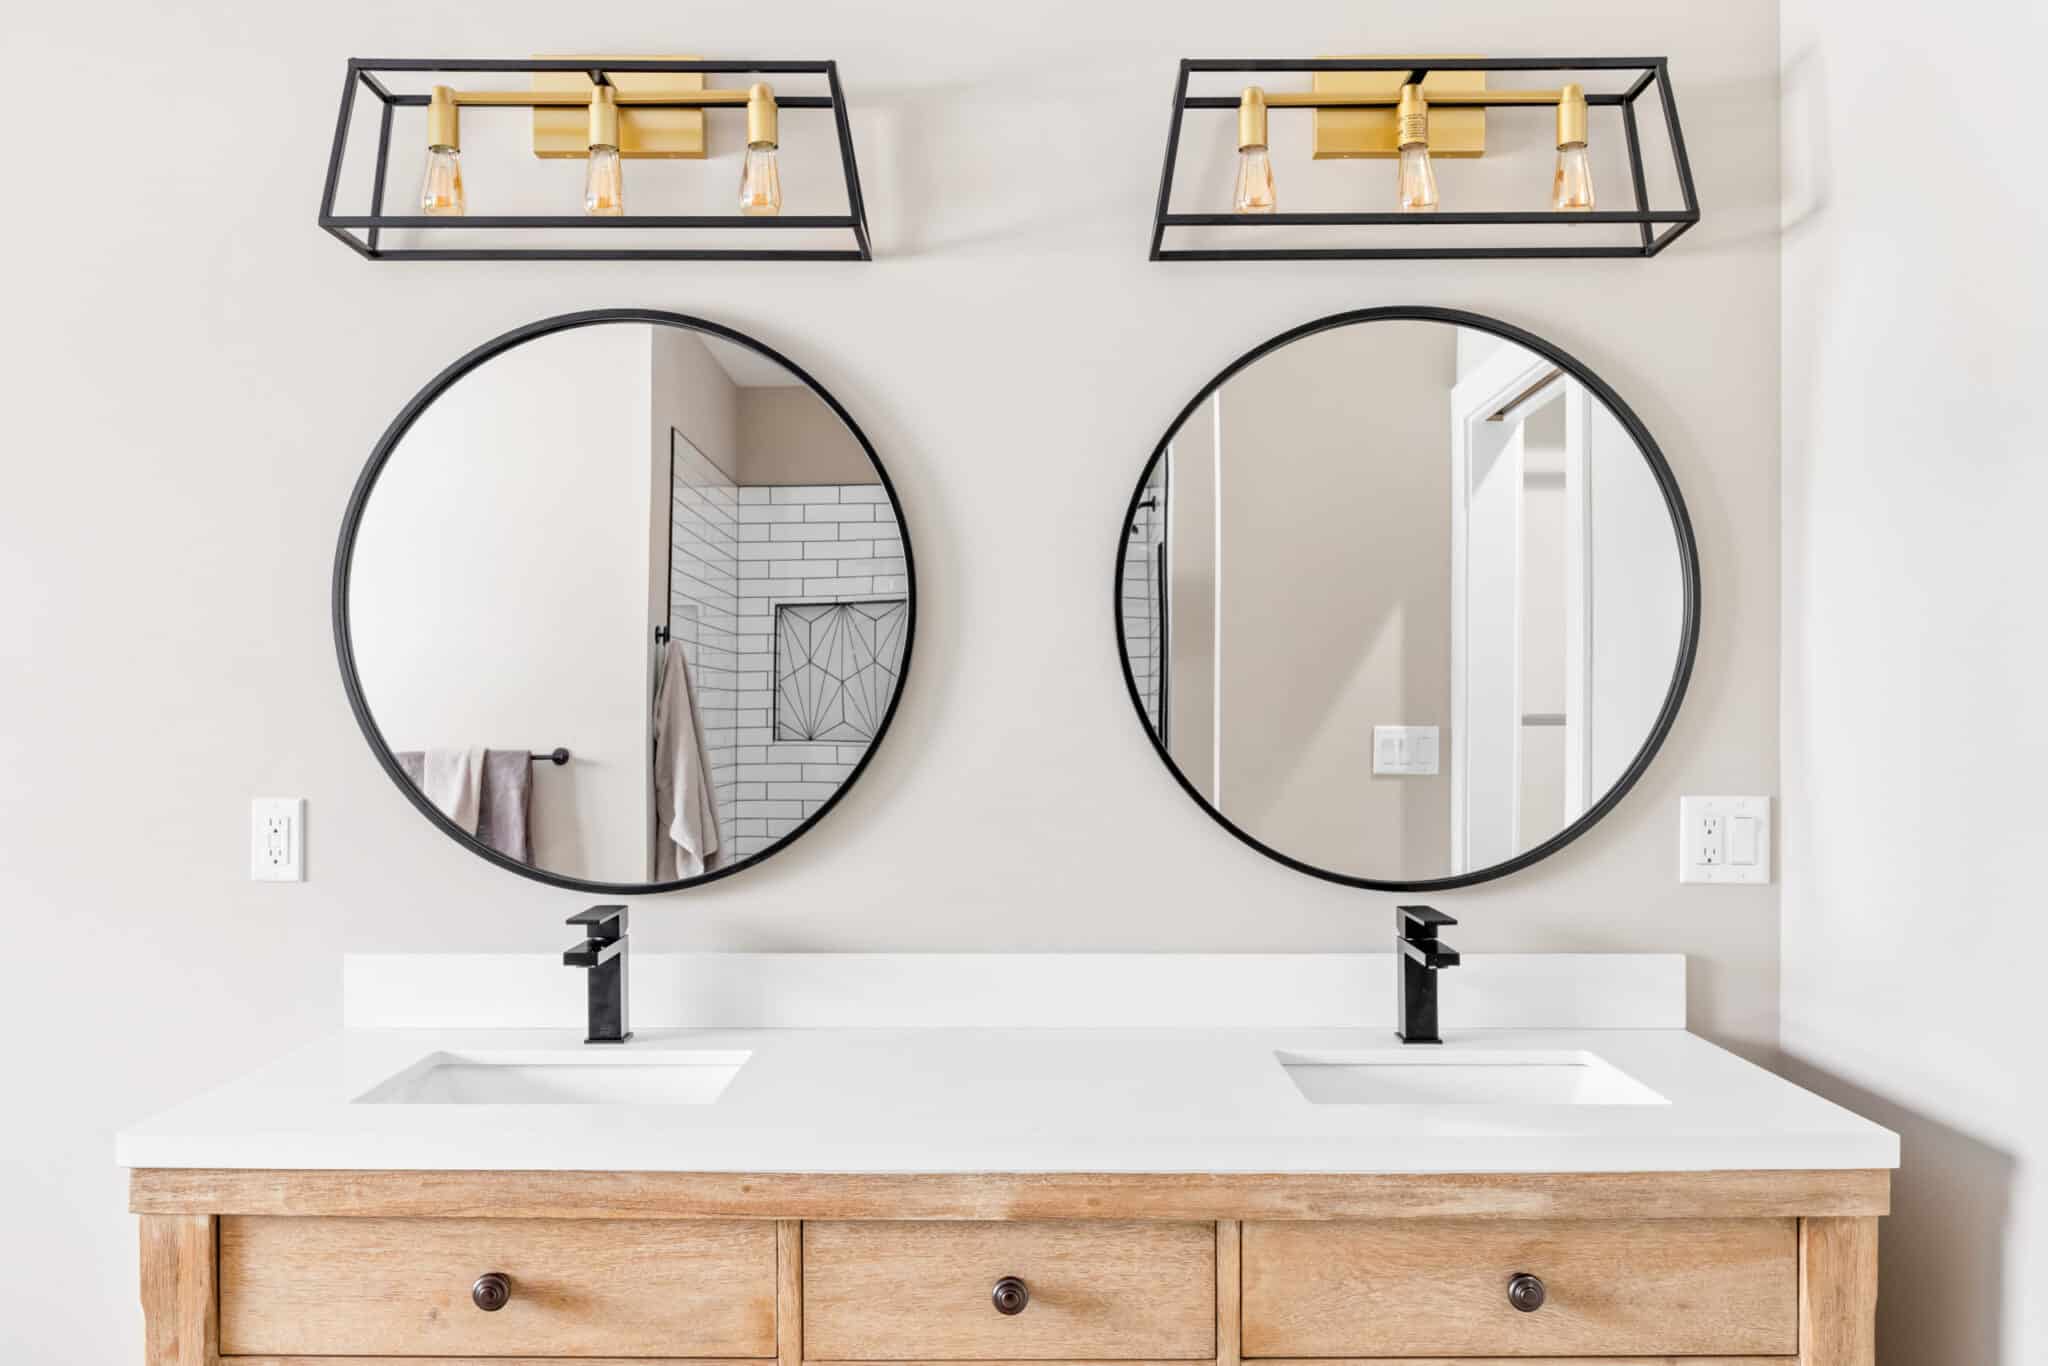 New mirrors in a bathroom remodel.